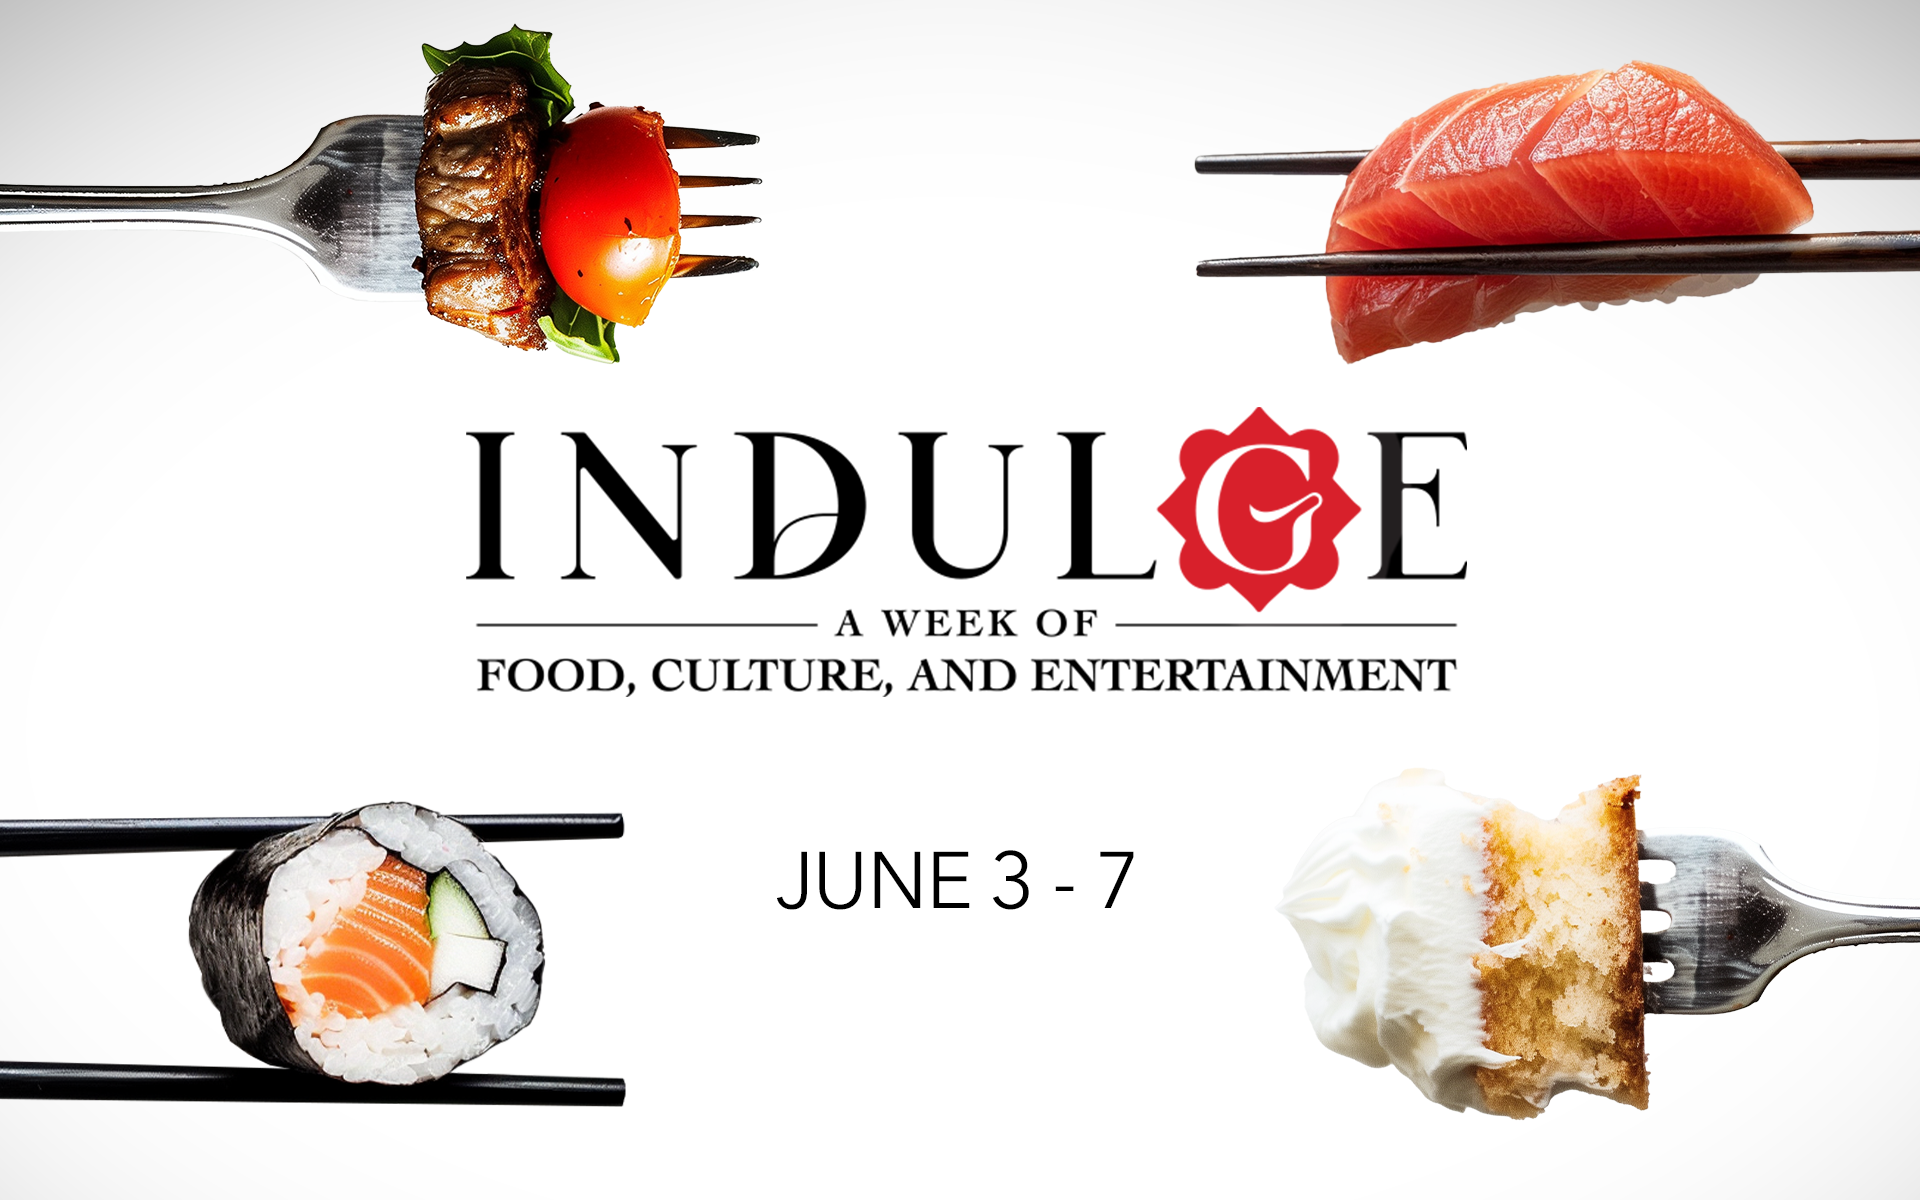 Indulge event logo, a week of the fabolous food in Las Vegas